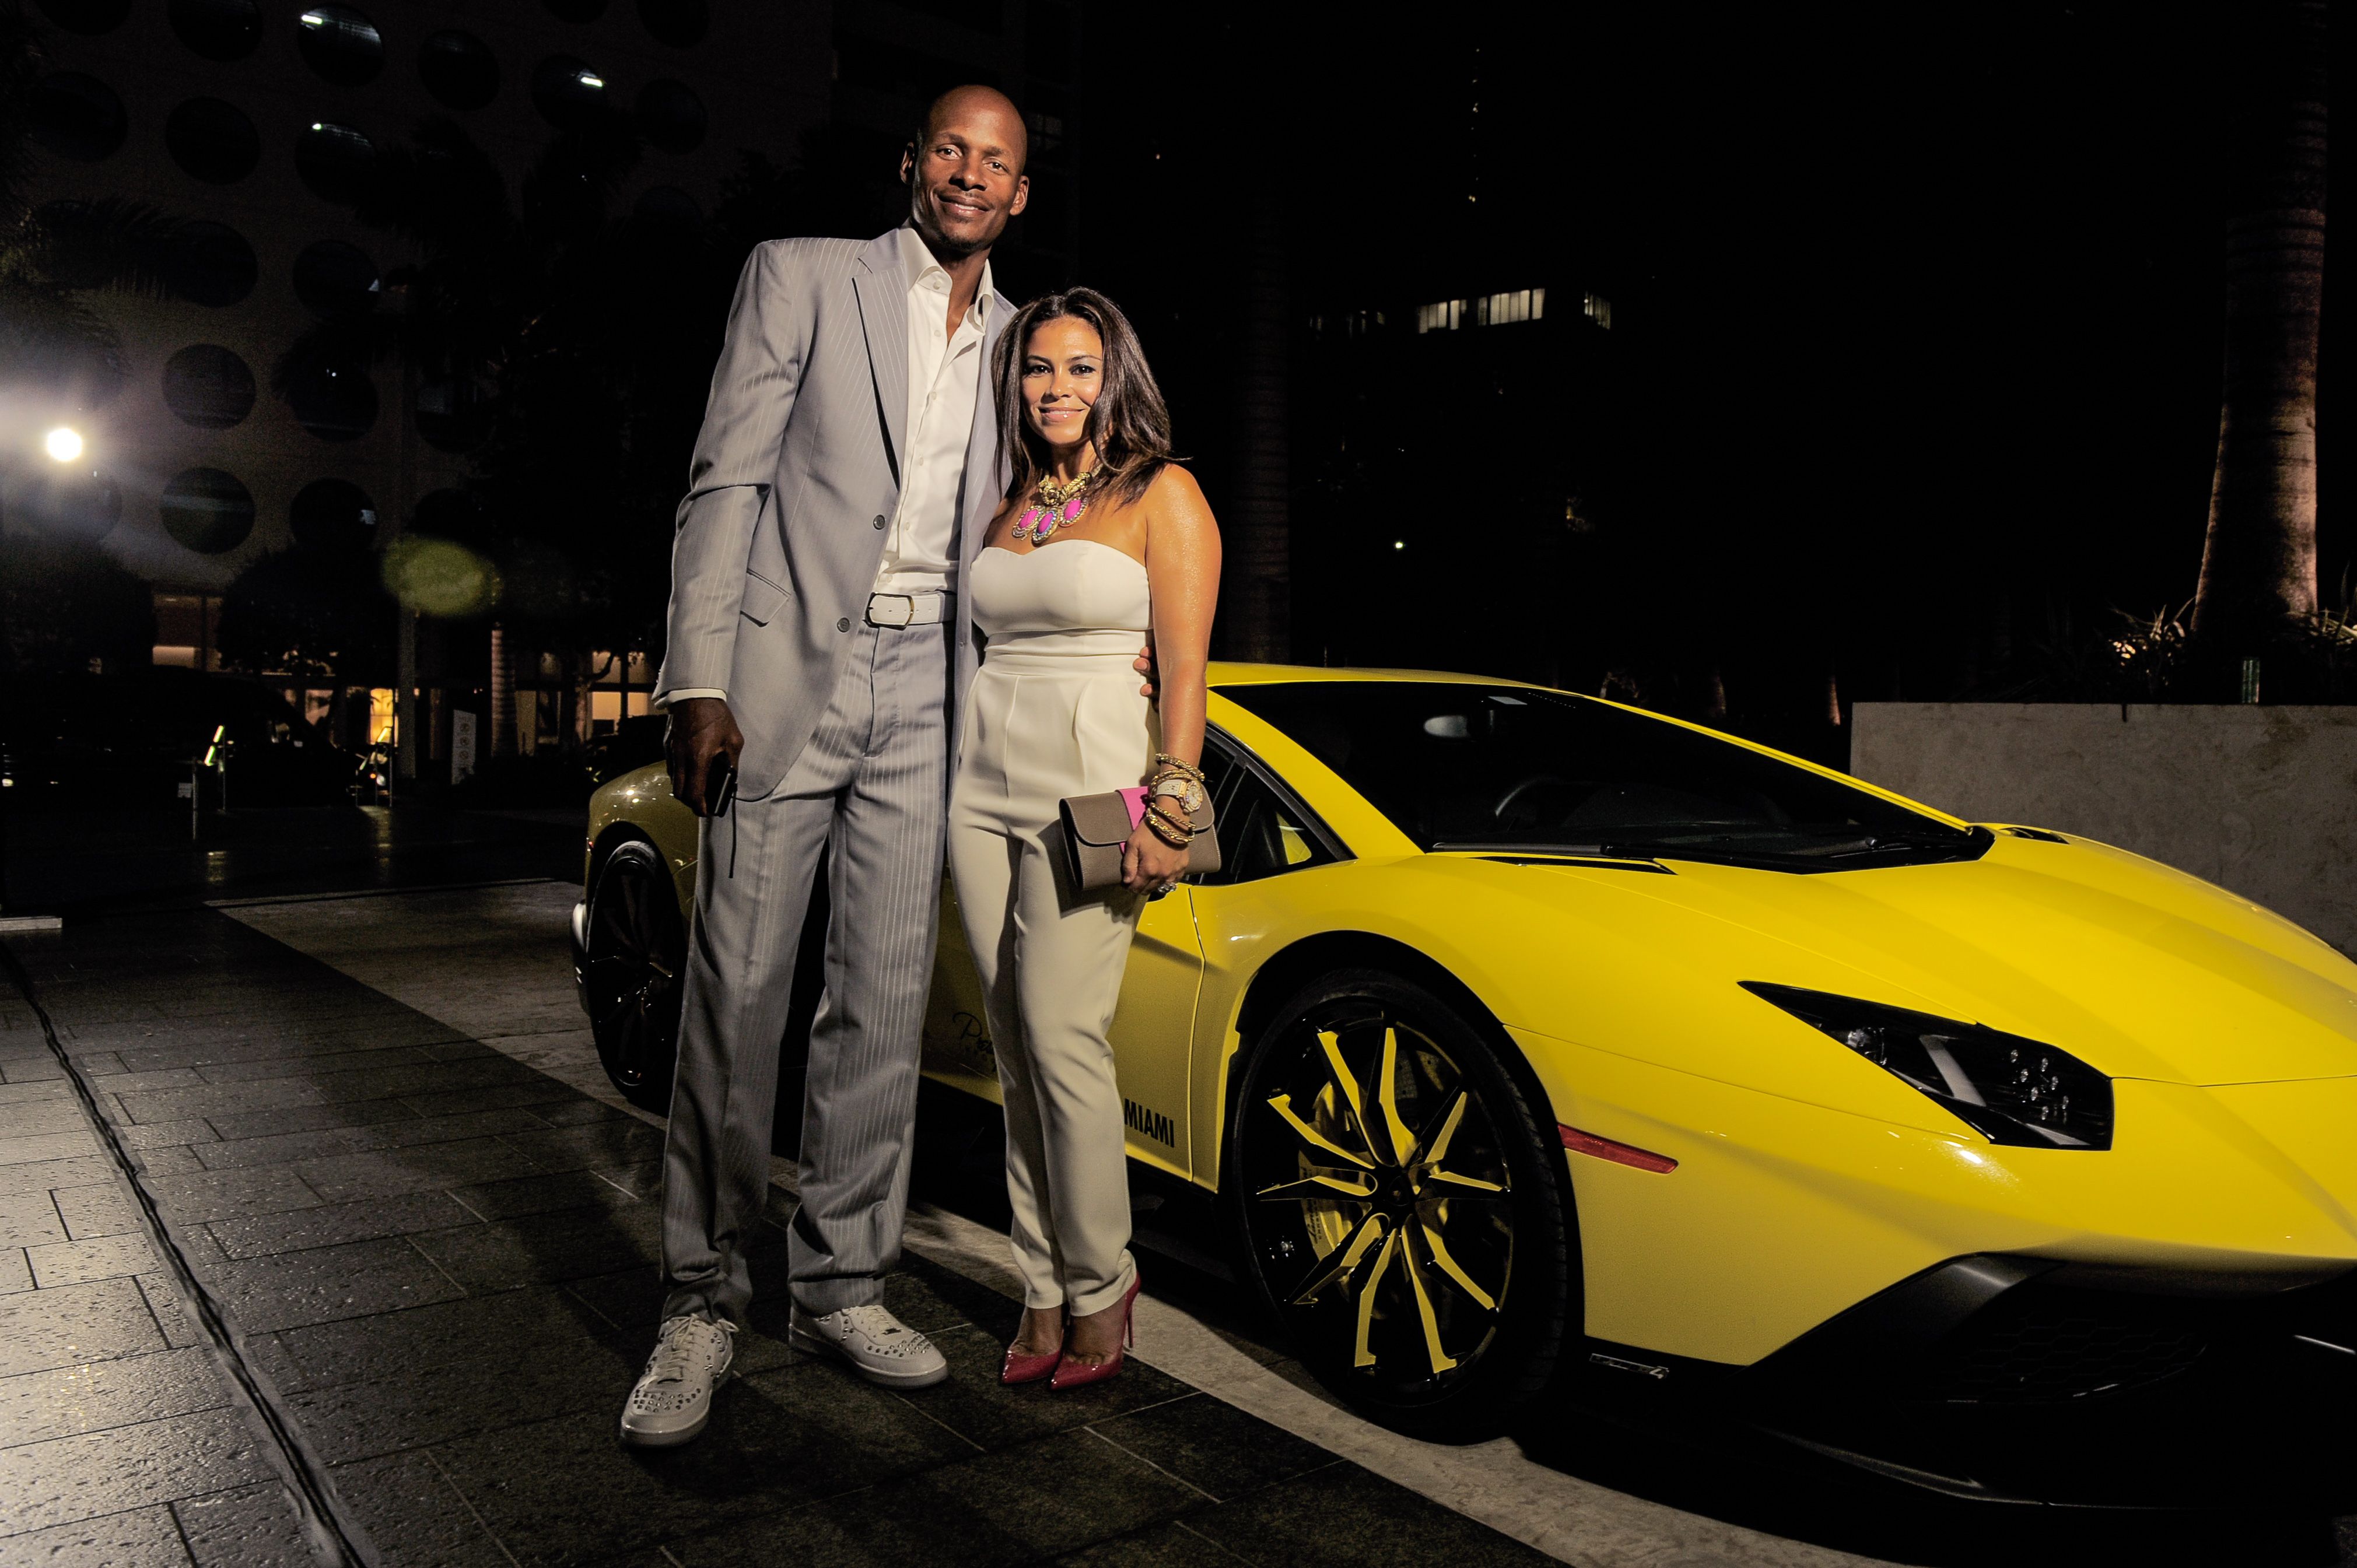  Ray Allen and his wife Shannon Allen at the Dom Perignon Haute Living 100 Dinner in May 2015 in Miami, Florida | Source: Getty Images